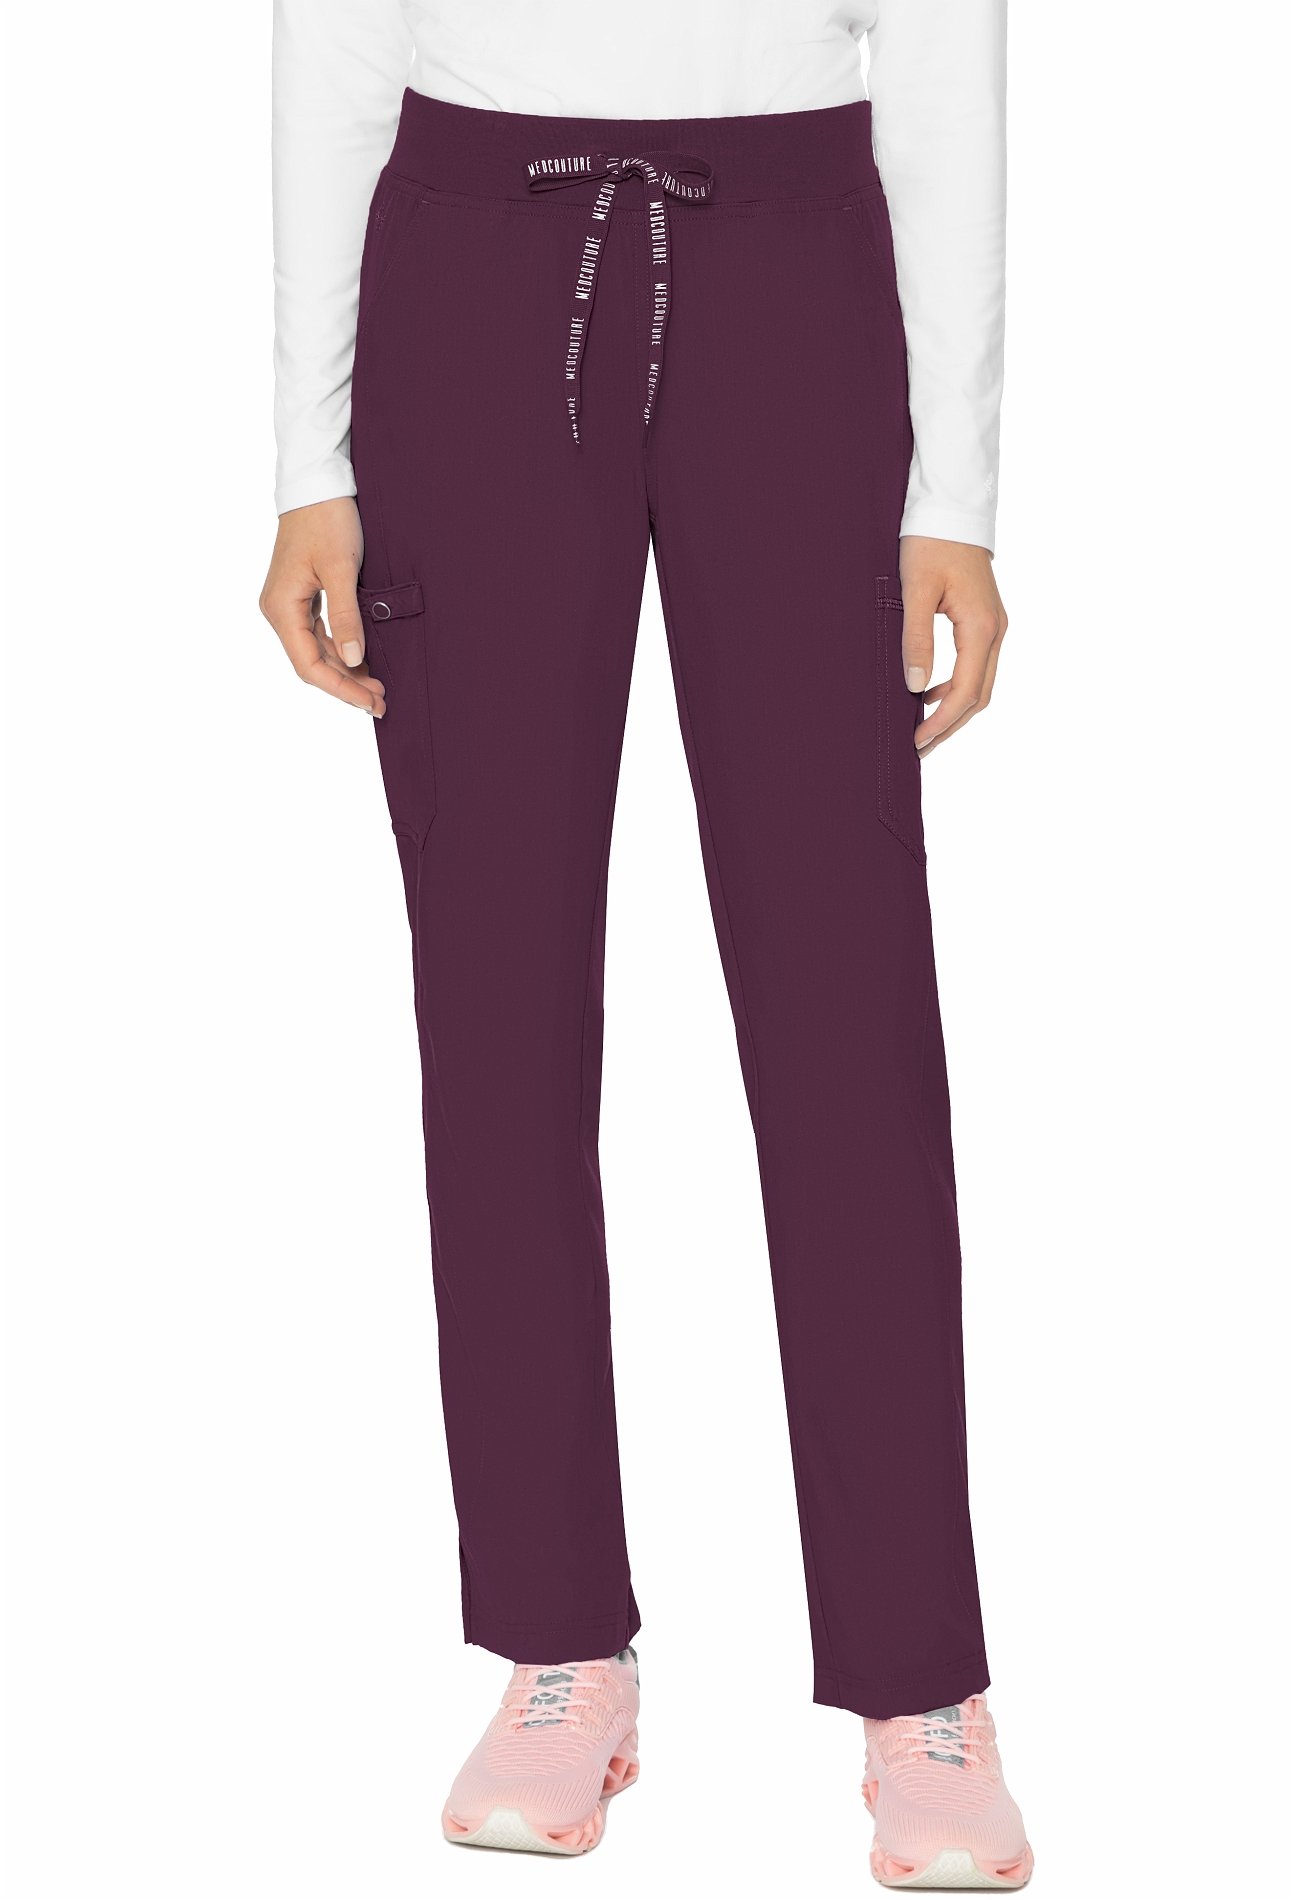 https://medicalscrubscollection.com/content/images/thumbs/0776862_med-couture-touch-womens-yoga-scrub-pants-7725.jpeg